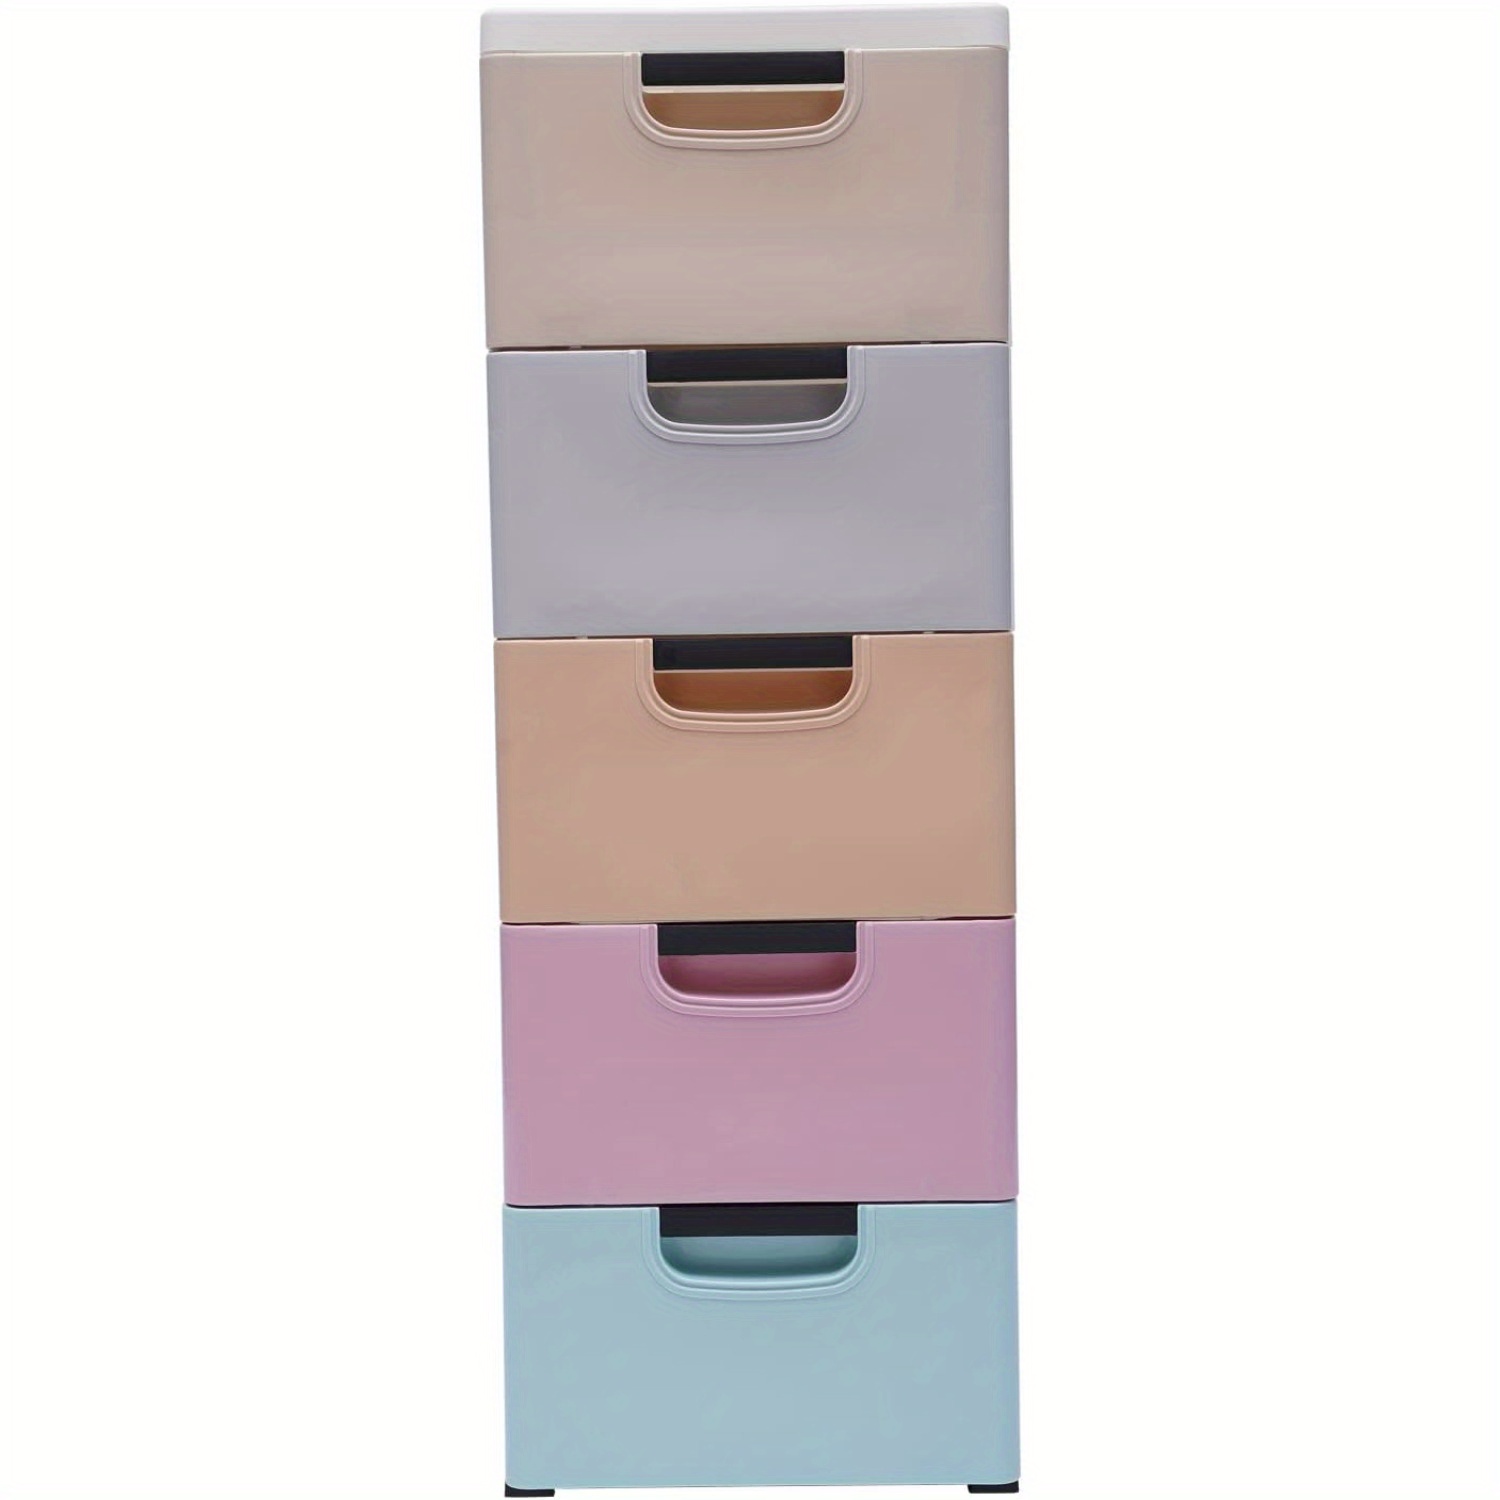 

5 Tier Drawers, Plastic Drawers Storage Cabinet Stackable Multifunction Vertical Clothes Storage Tower With 5 Drawers For Hallway Entryway Bedroom Home (light Color)